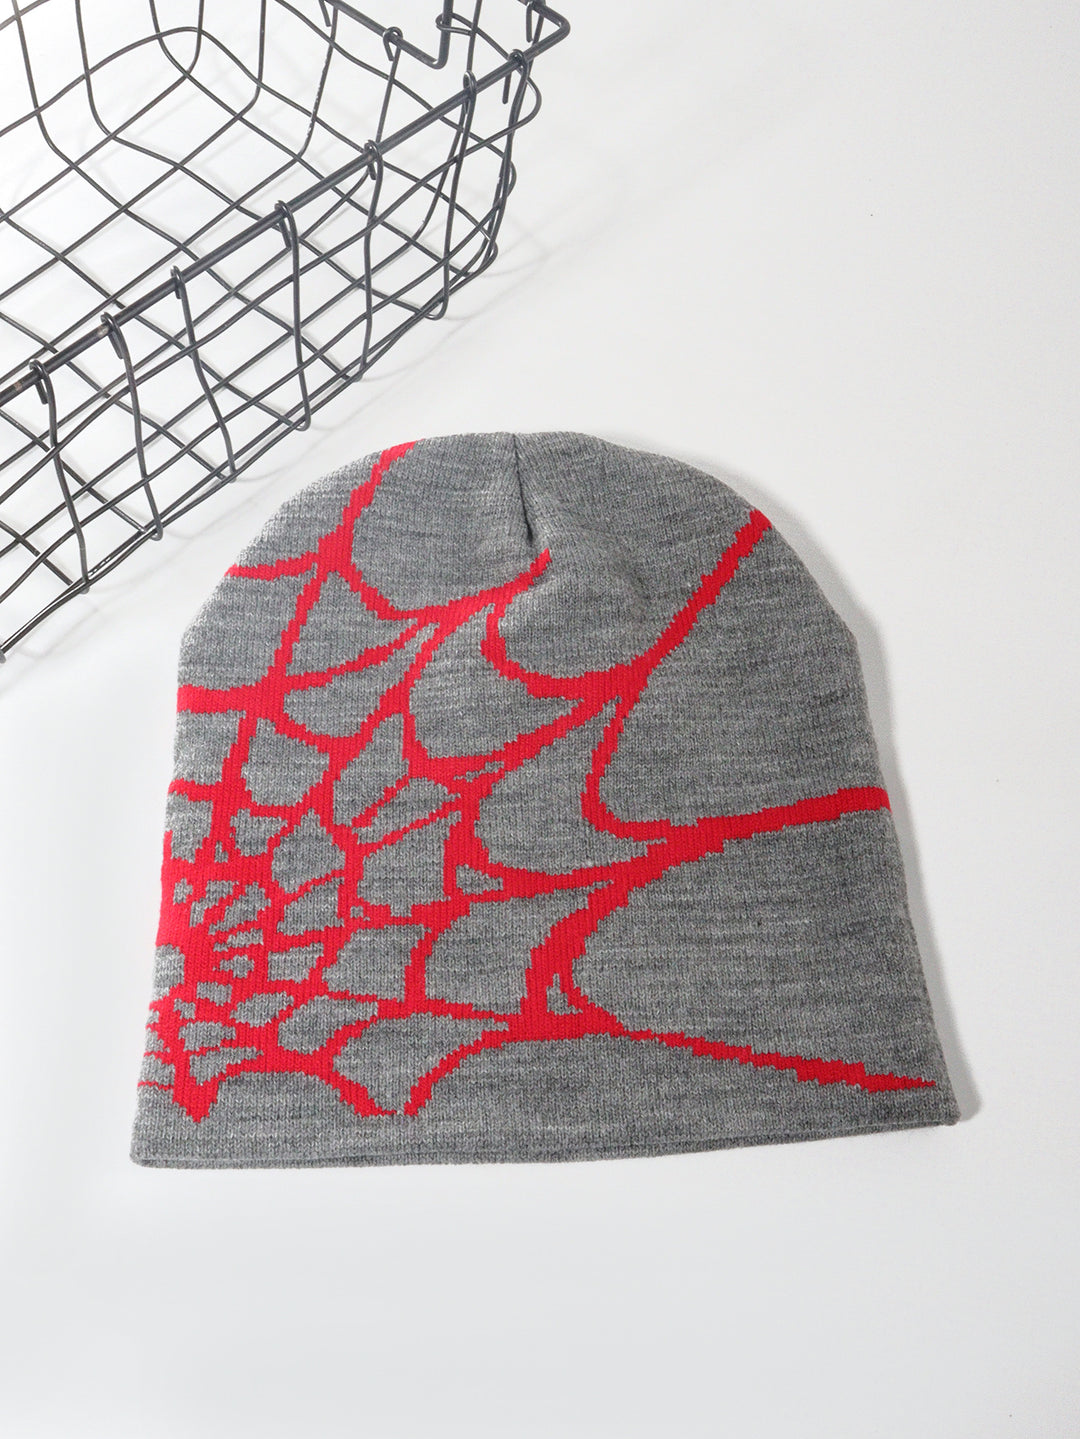 Knitted Pullover Spider Web Y2K Jacquard Hat for Men and Women